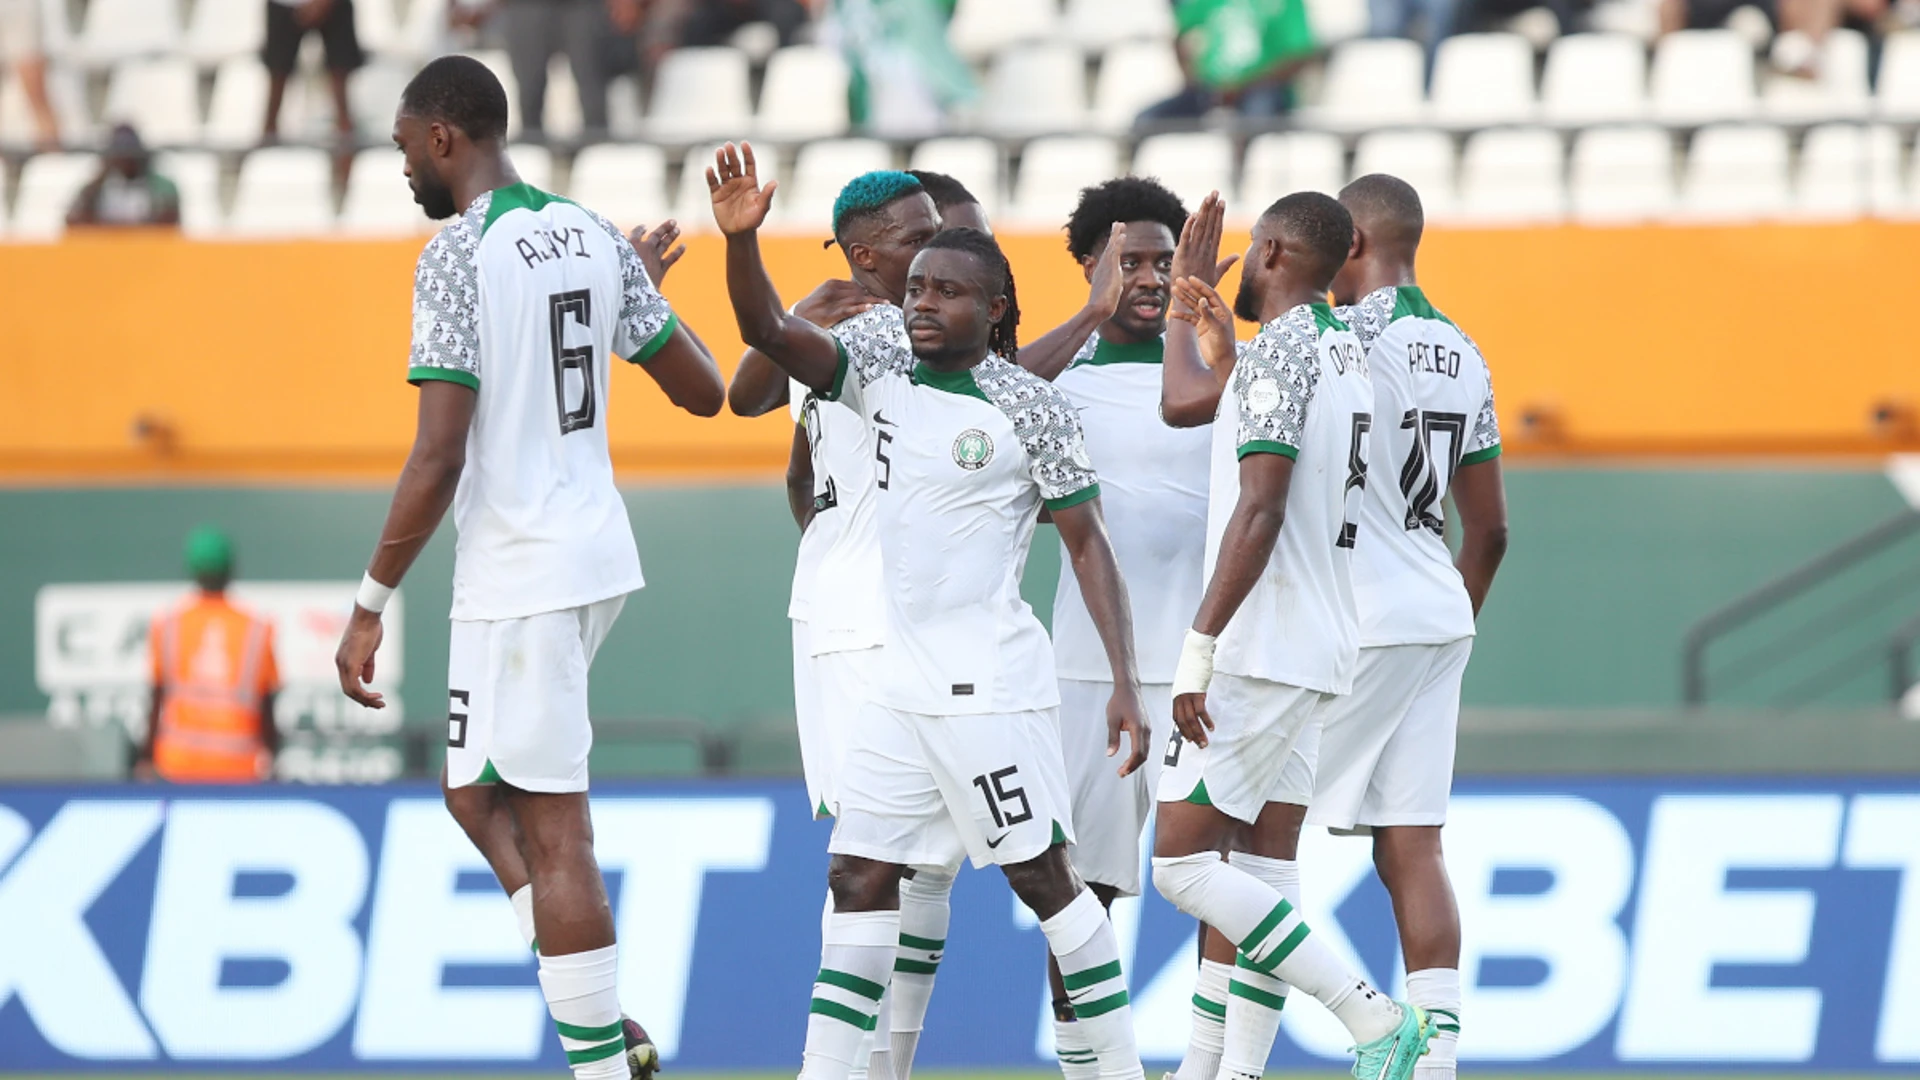 AFCON draw offers Nigeria chance to avenge Benin loss